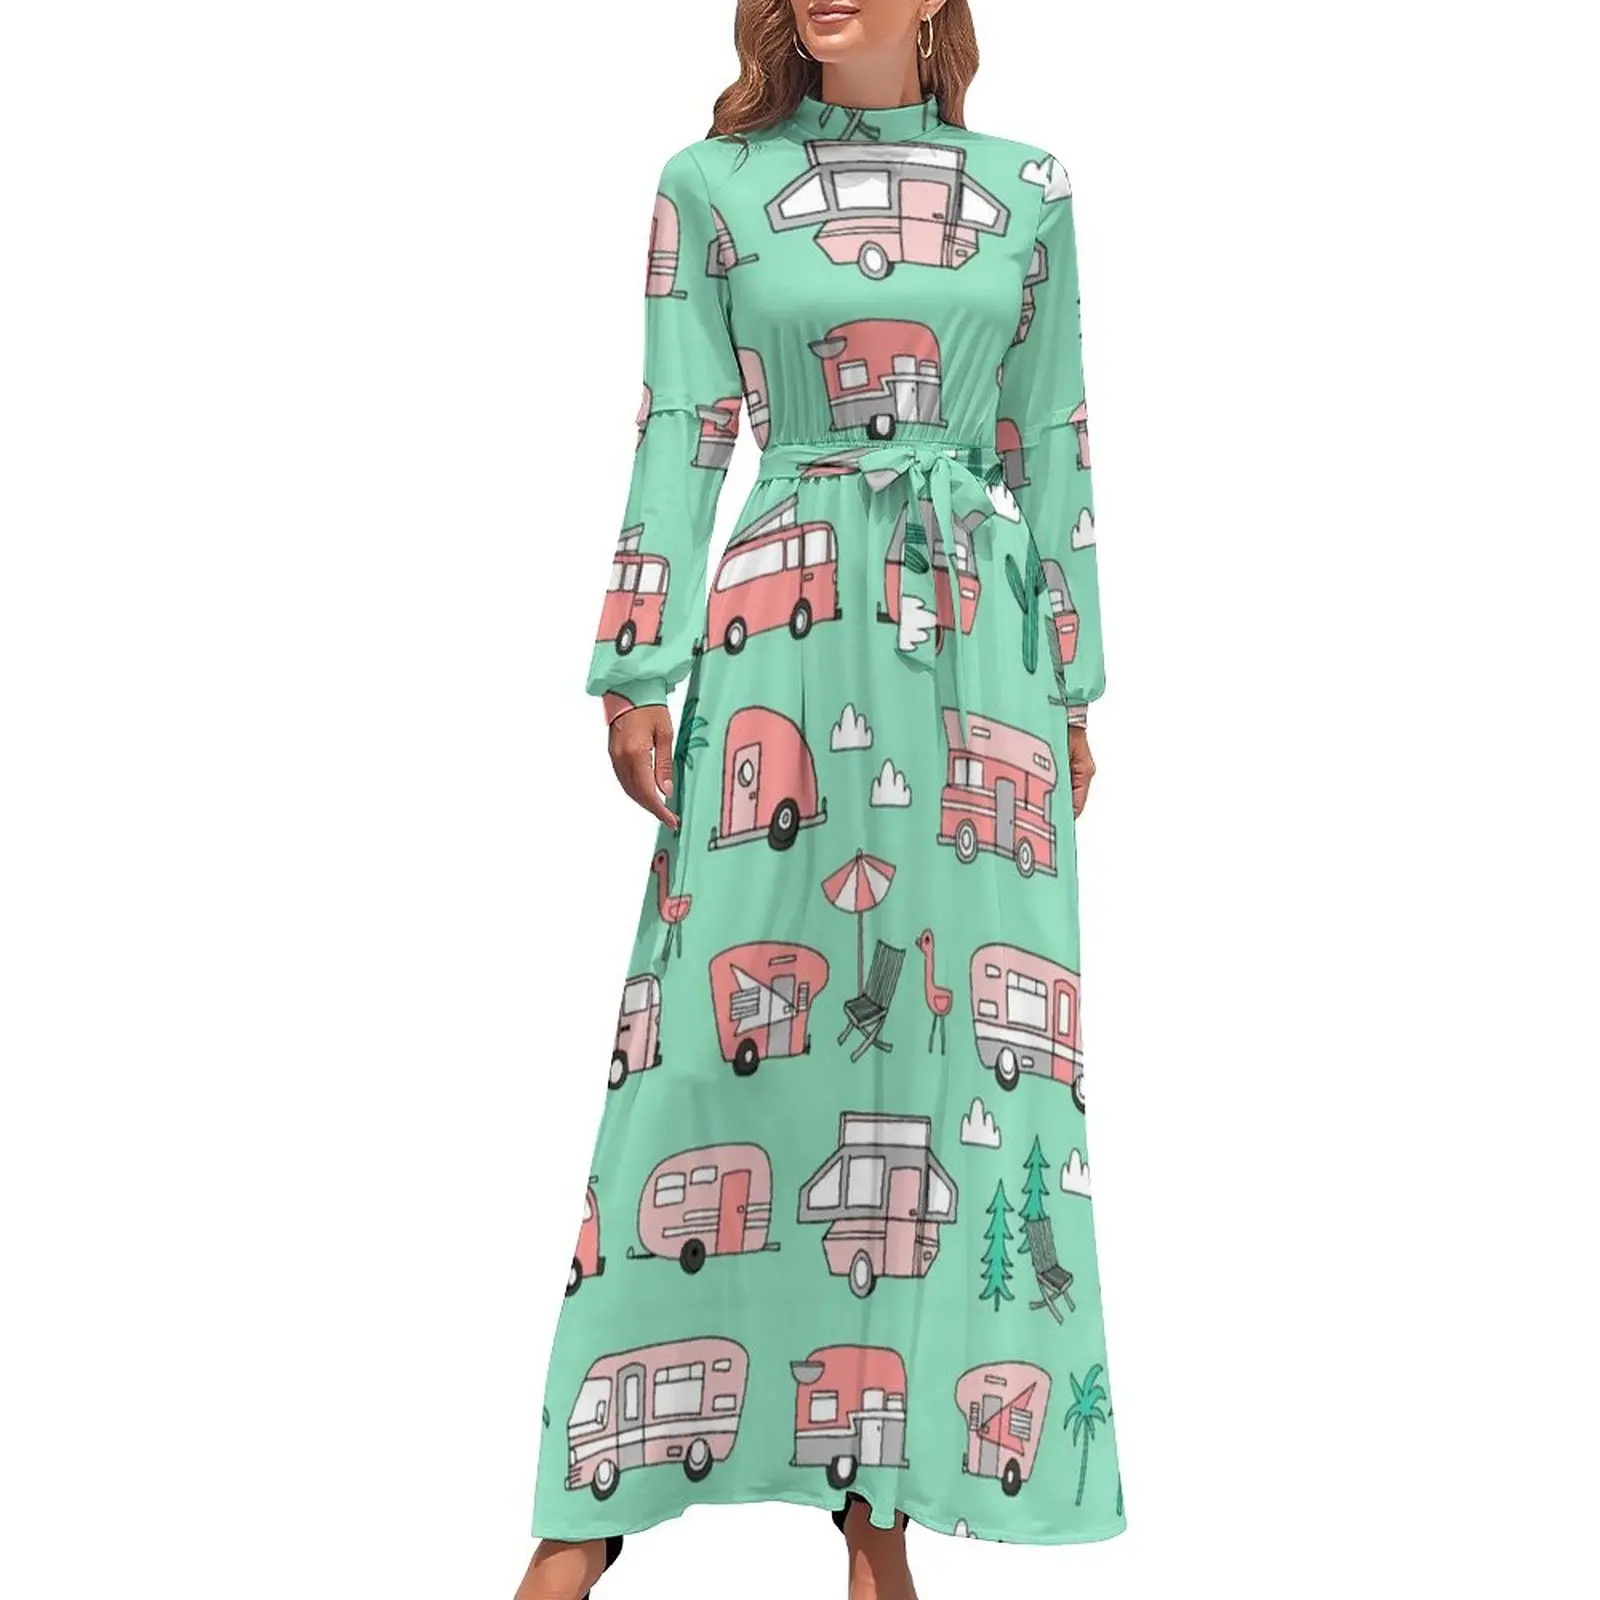 

Camper Vacation Dress RV Hipster Road Trip Cute Graphic Maxi Dress High Neck Long Sleeve Aesthetic Boho Beach Long Dresses